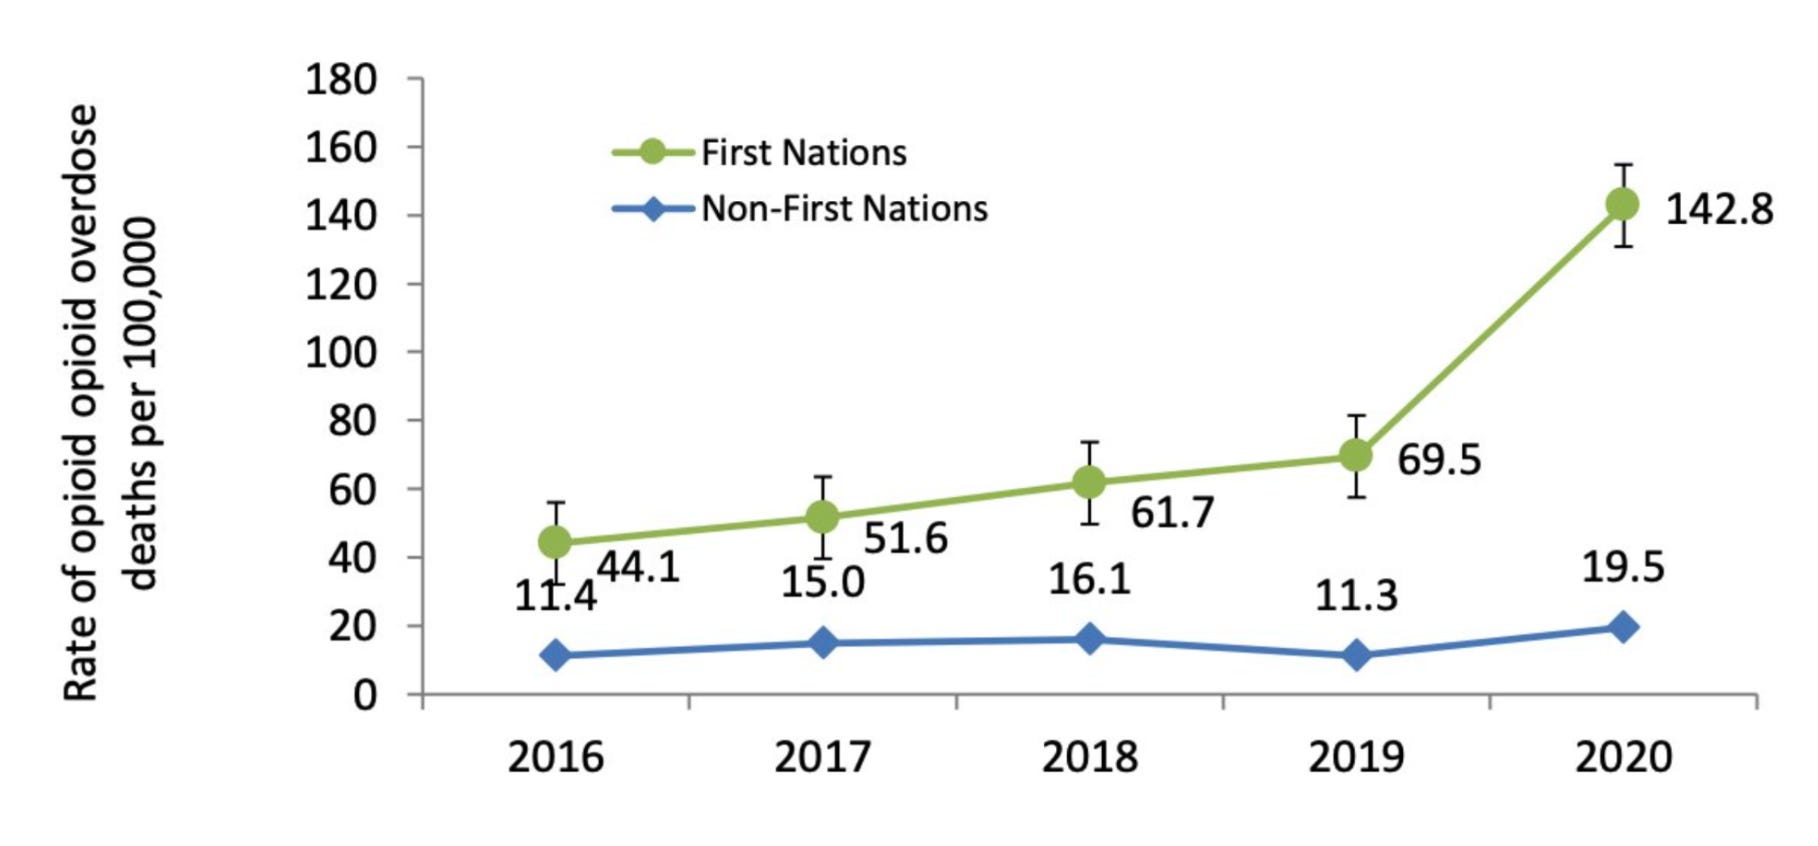 Graph showing rate of apparent accidental opioid poisoning deaths per 100,000 by First Nations status and year. January 1, 2016 to December 31, 2020.